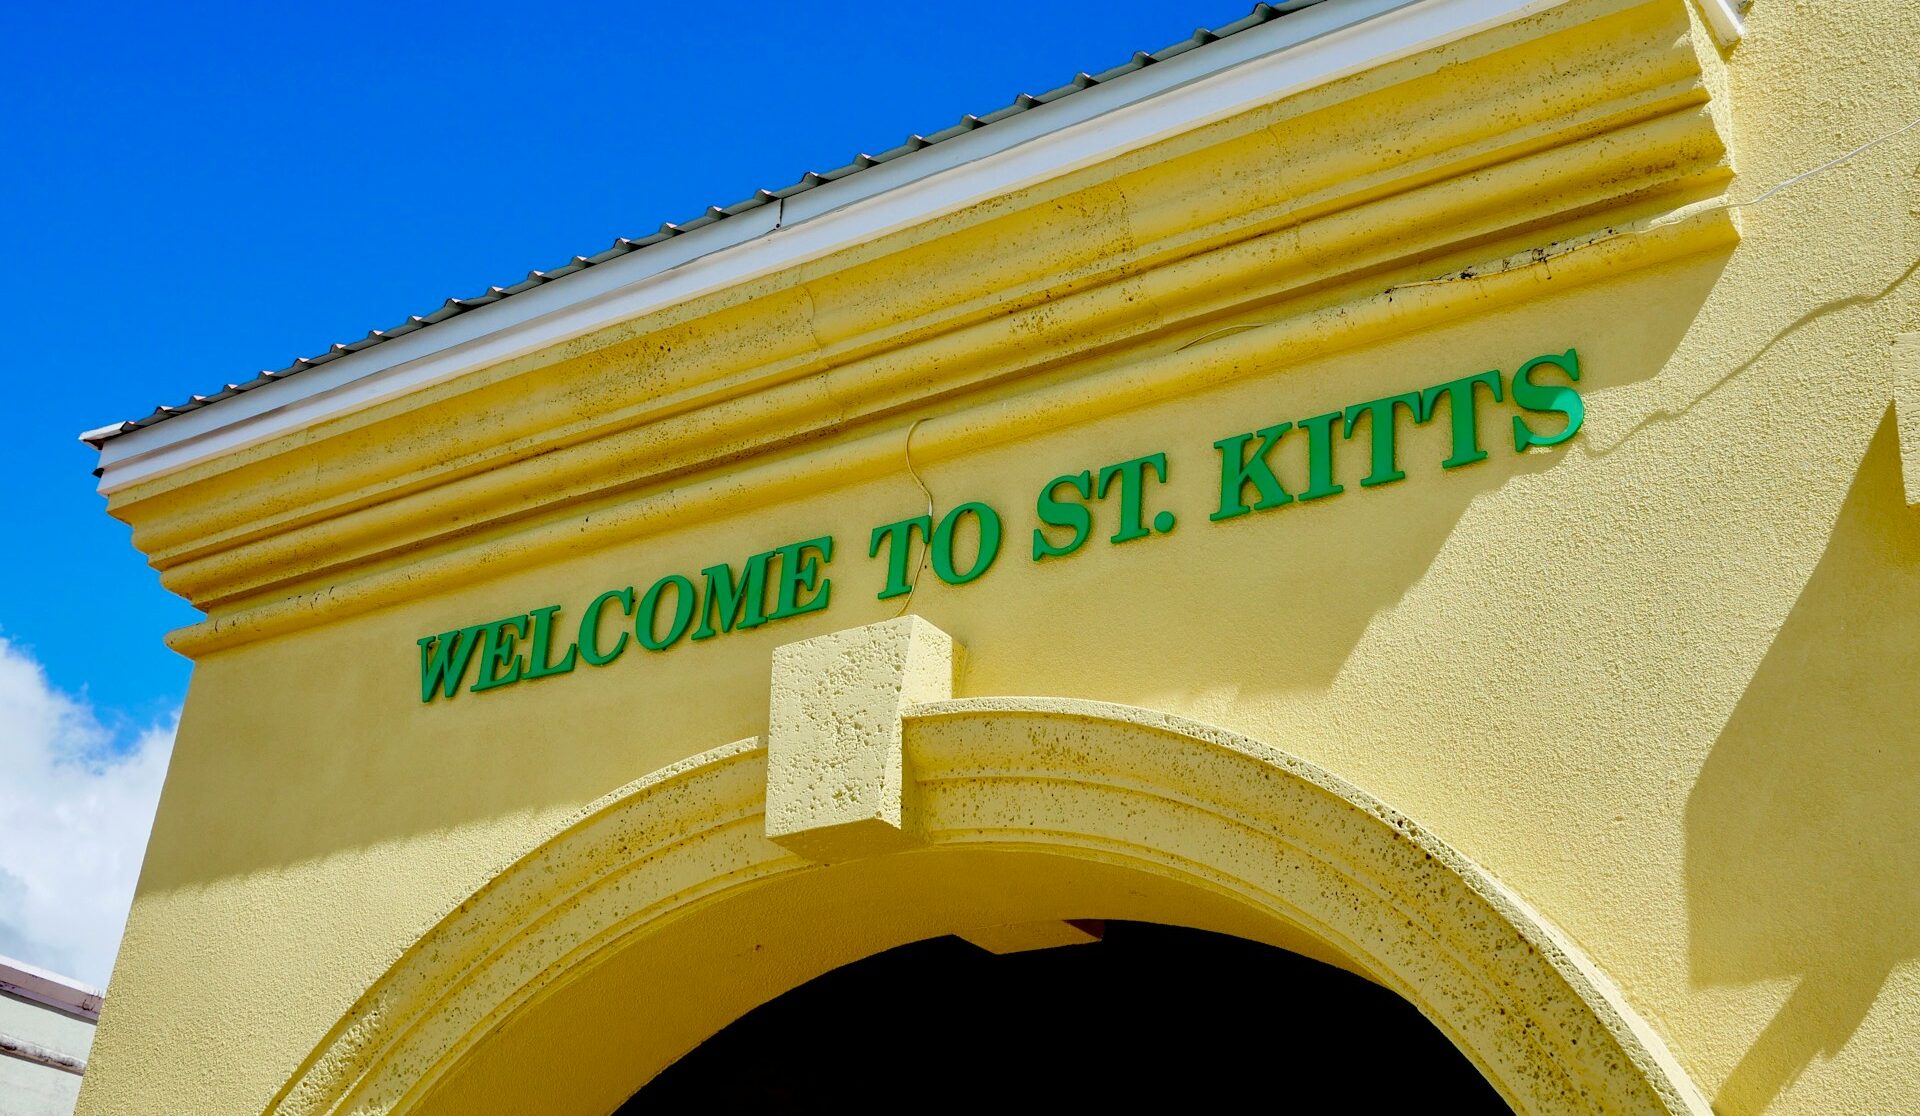 Sign on building that states "Welcome to St. Kitts"